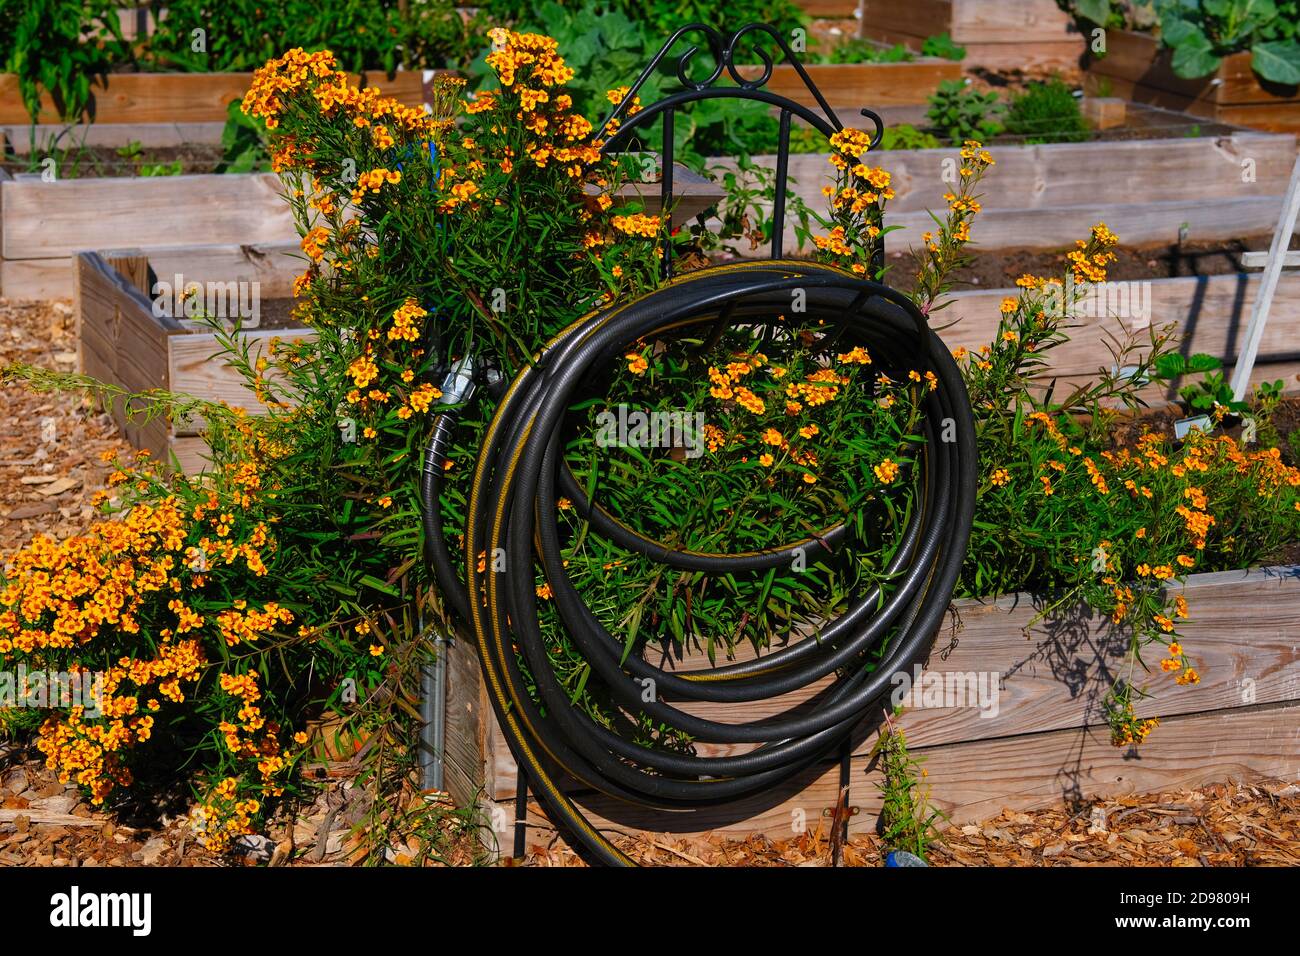 Urban Gardens with Mini Library, Coiled Hose, Ducks & Geese, Vegetables, Flowers, Kale, Sunflowers, Tomatoes, Peppers, and Copper Piping for Water. Stock Photo